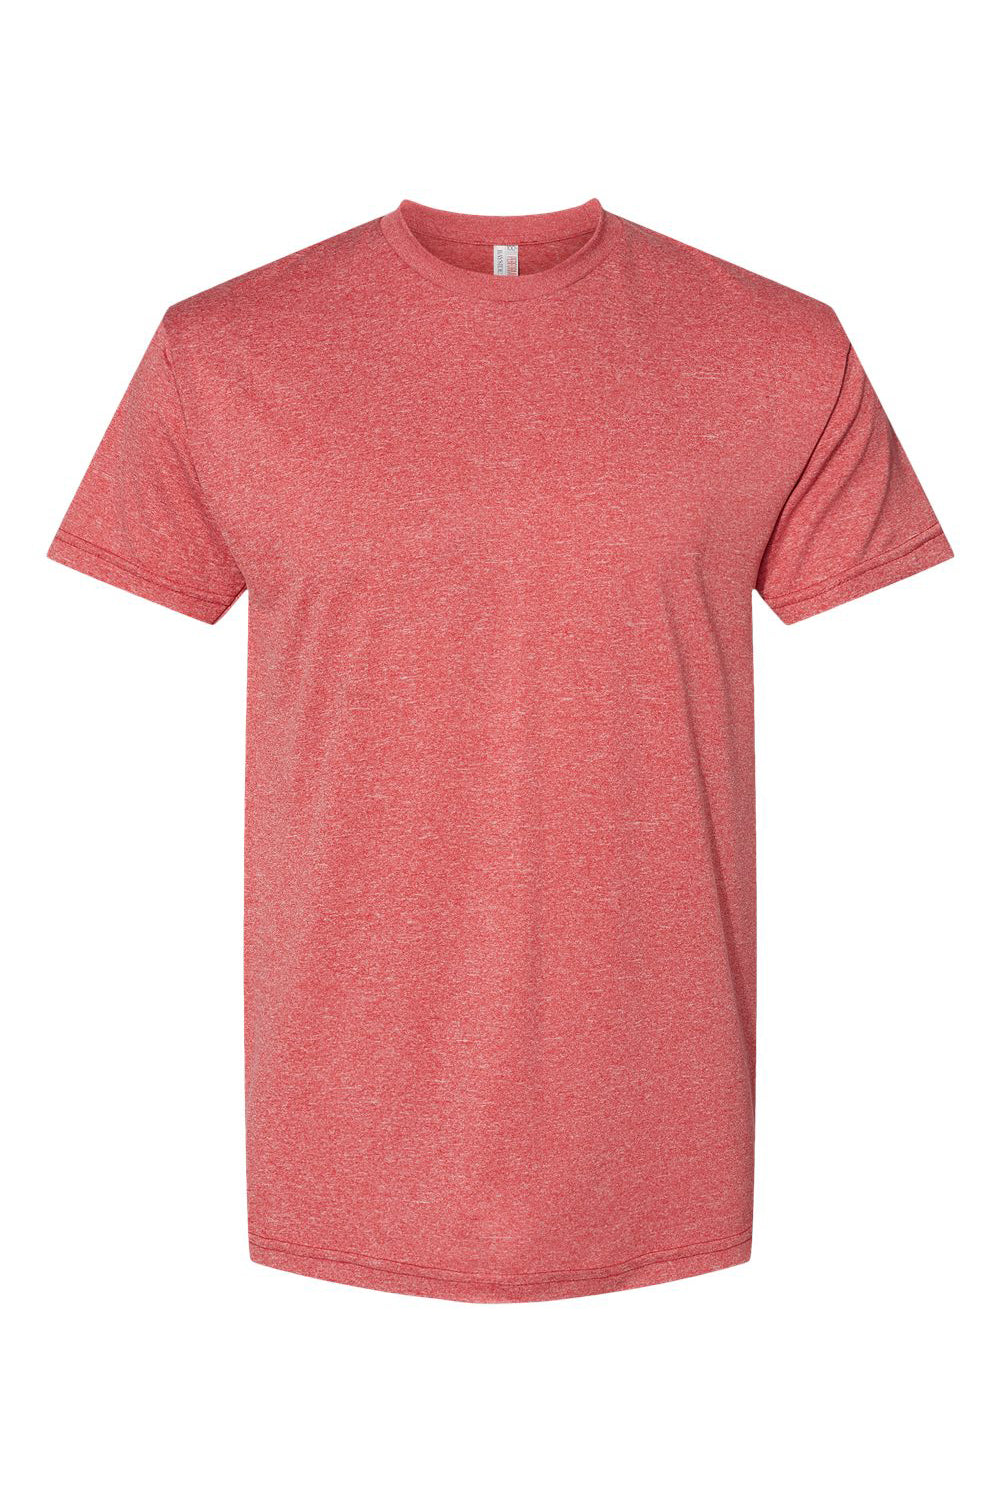 Bayside 5300 Mens USA Made Performance Short Sleeve Crewneck T-Shirt Cationic Red Flat Front